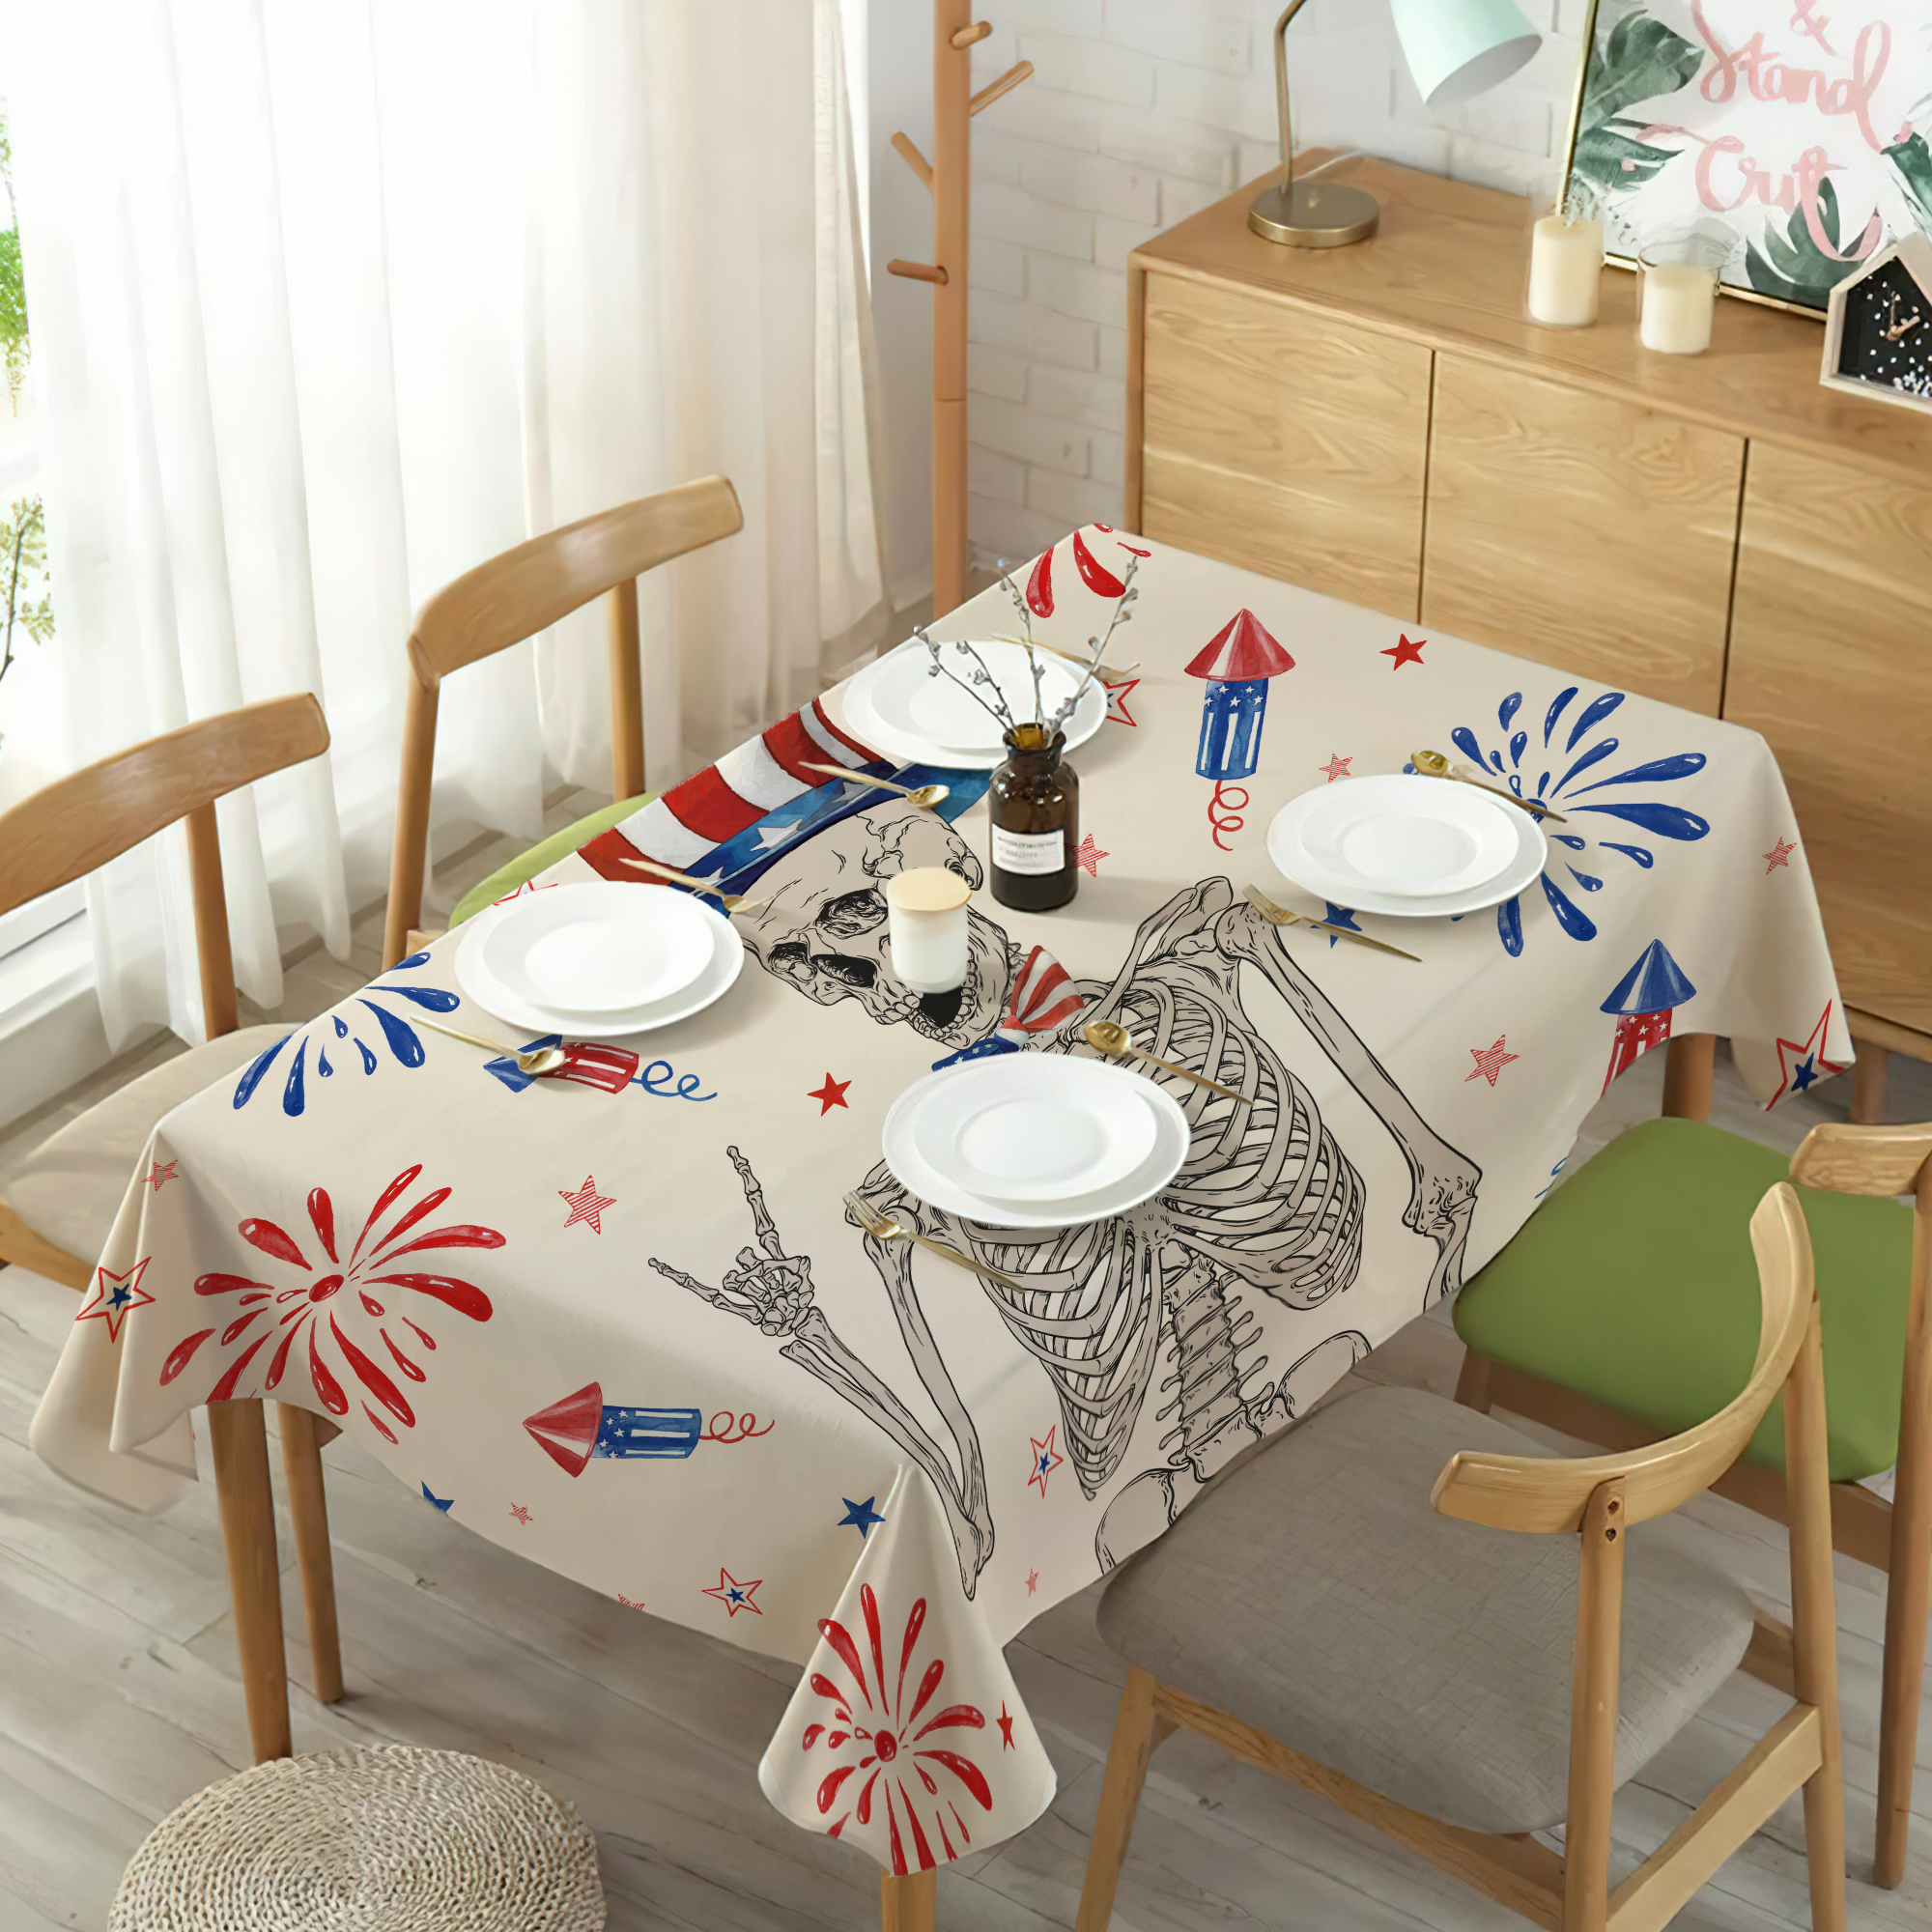 Riyidecor Independence Day Skull Table Cloth esistant Fabric Wrinkle Free Tablecloths Kitchen Dining Room Table Cover for Tables Outdoor Farmhouse Holiday, 52 x 70 Inch